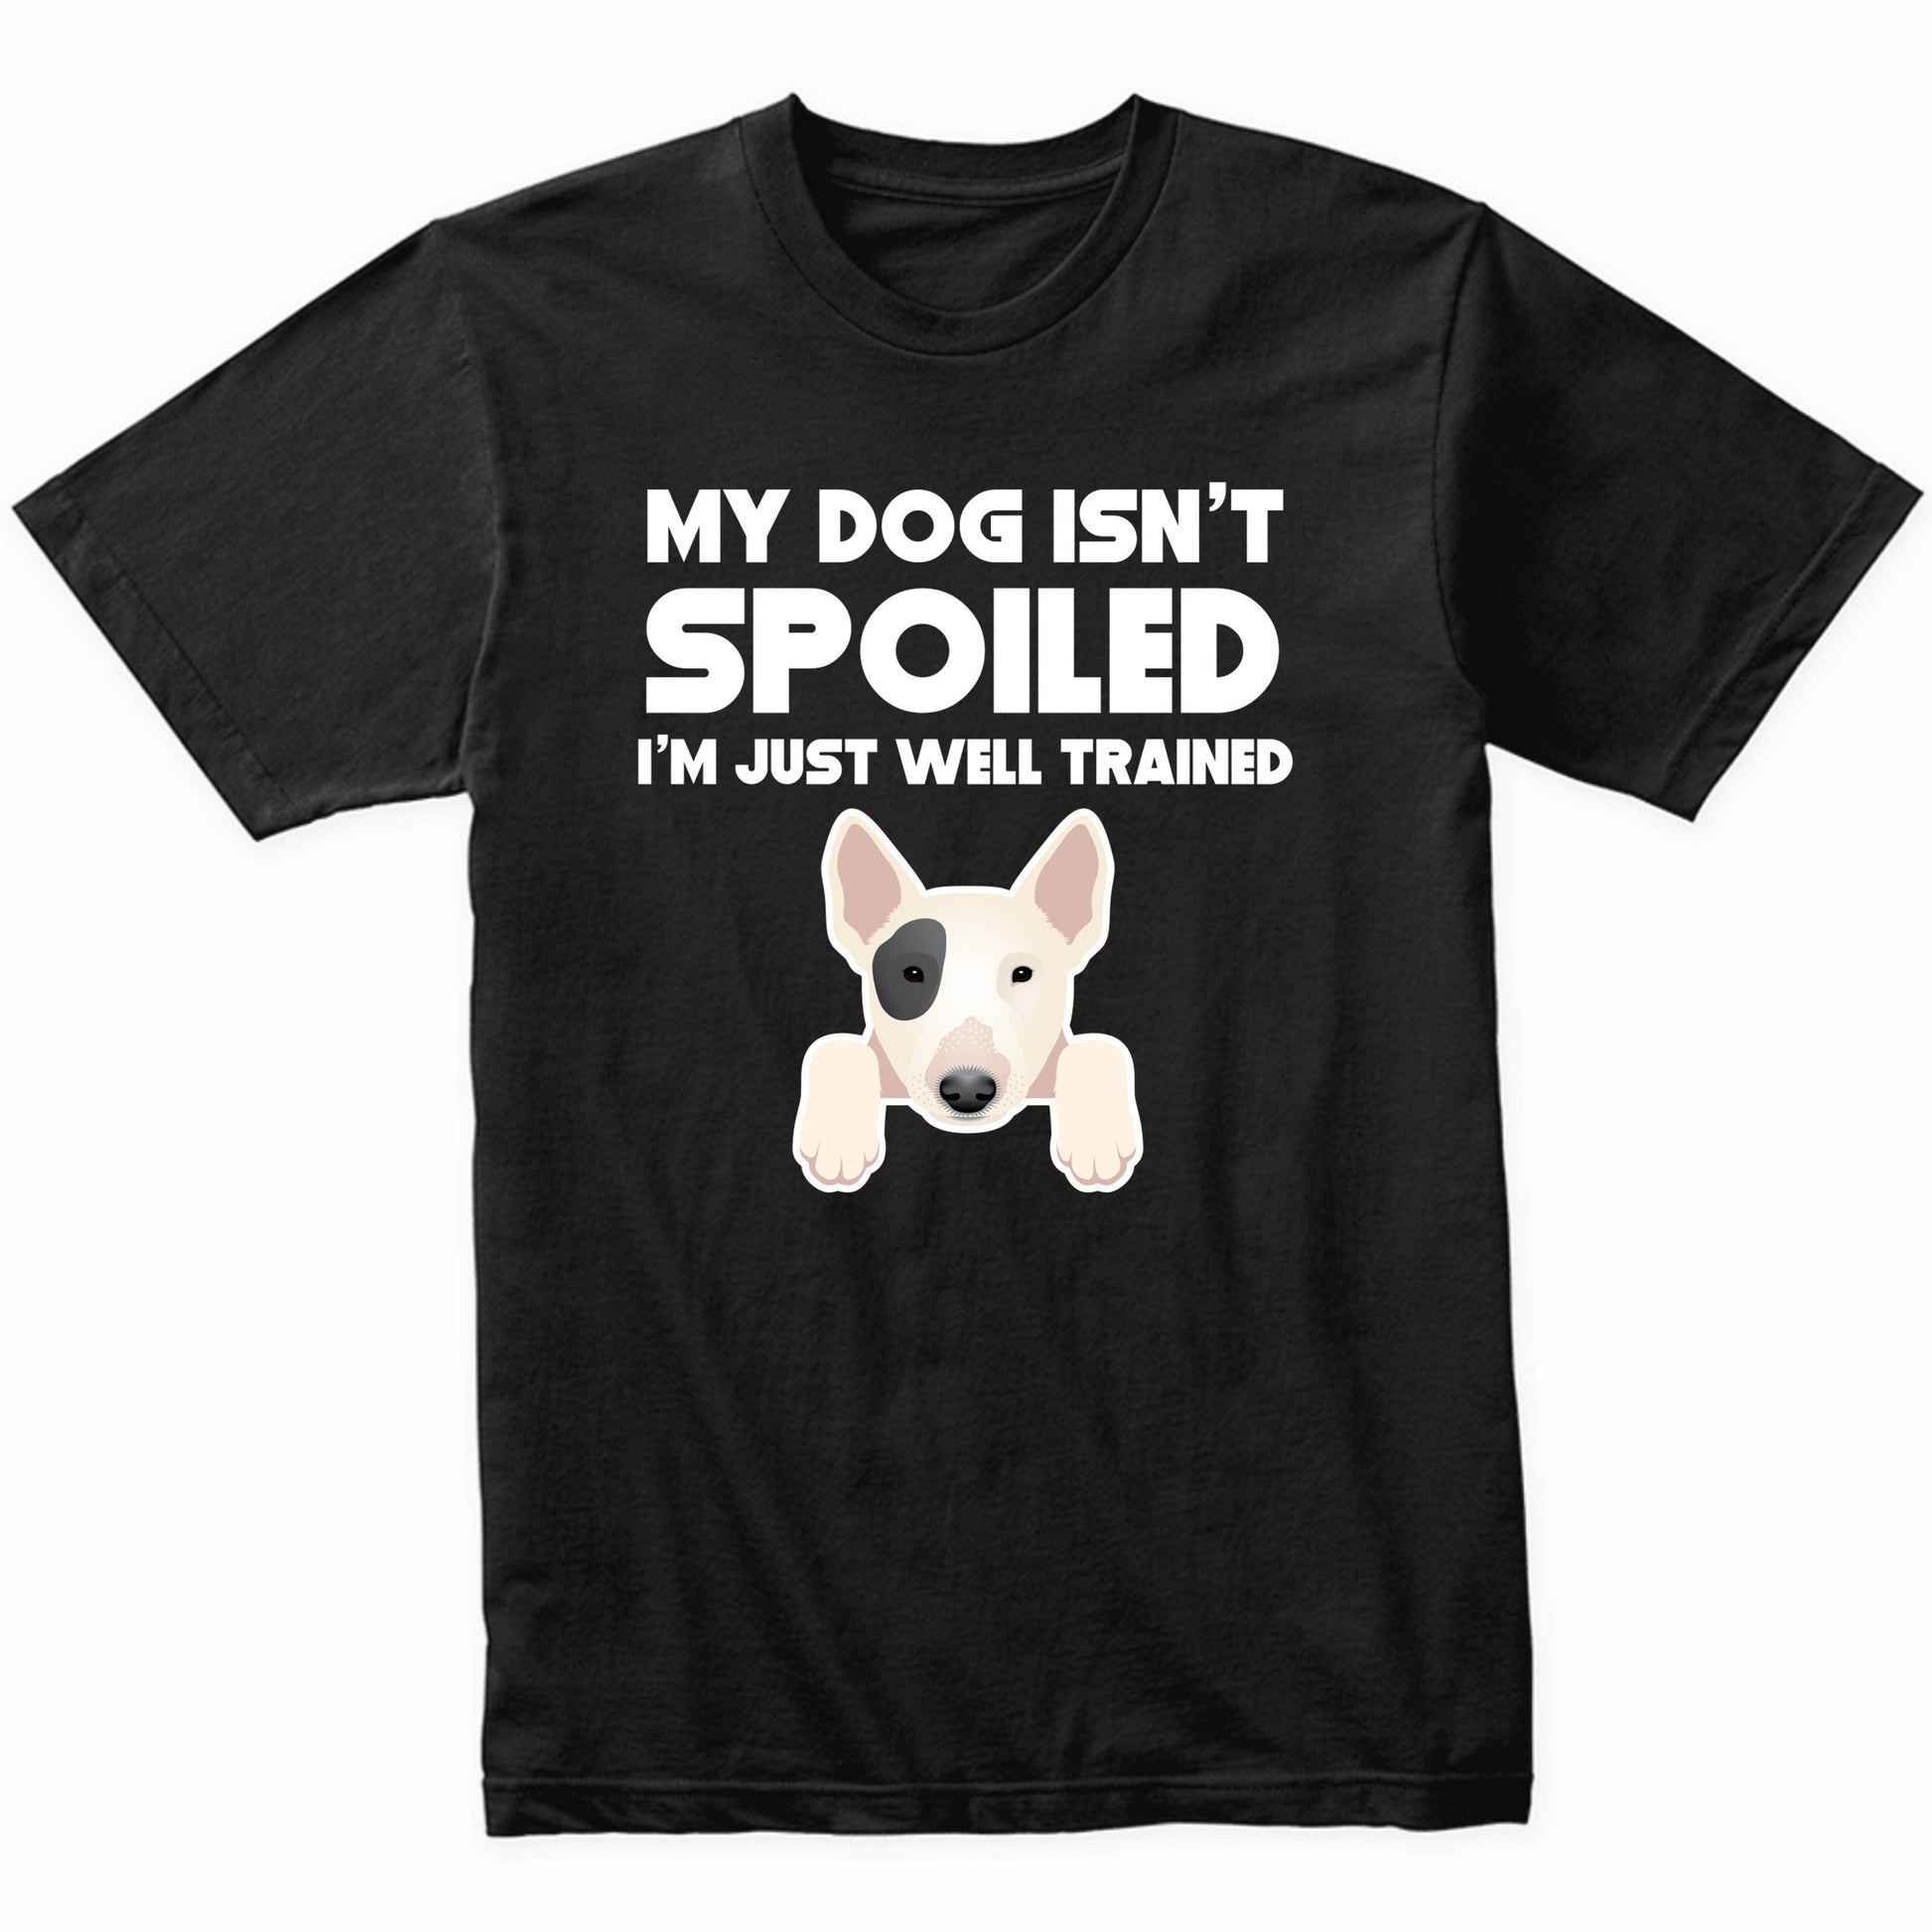 My Dog Isn't Spoiled I'm Just Well Trained Funny Bull Terrier T-Shirt